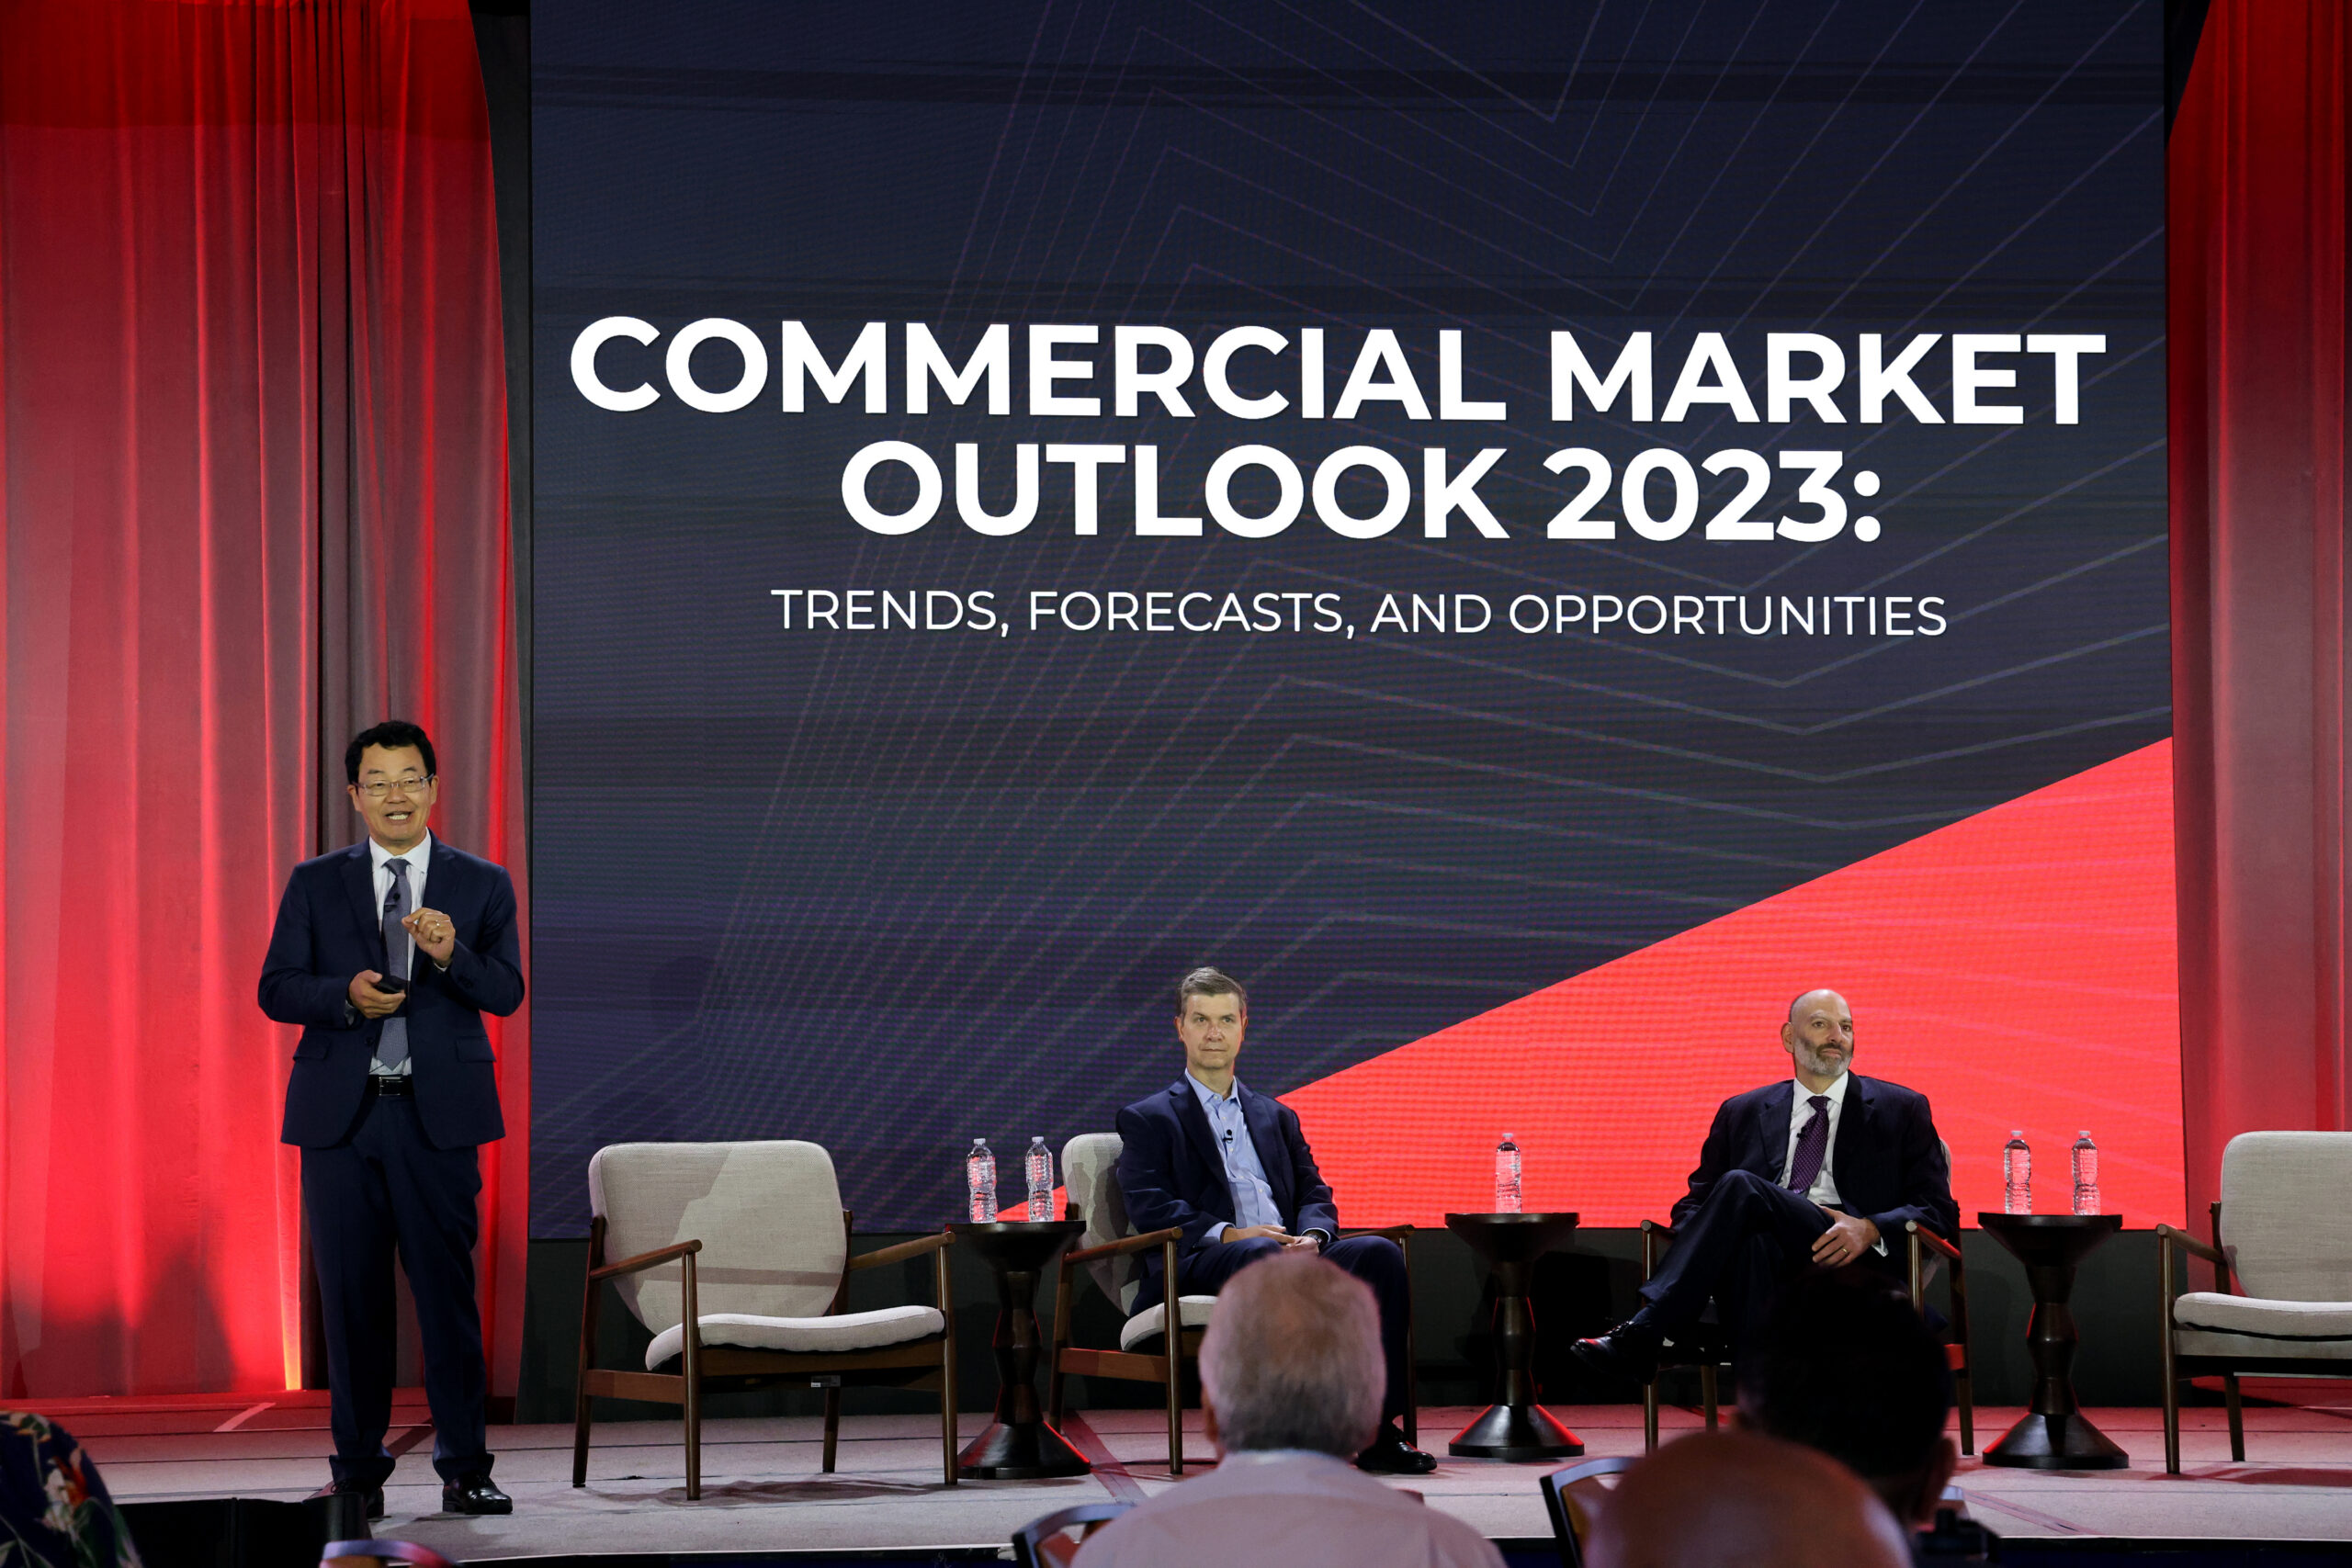 Lawrence Yun delivers the Commercial Market Outlook for 2023 at the C5 + CCIM Global Summit.